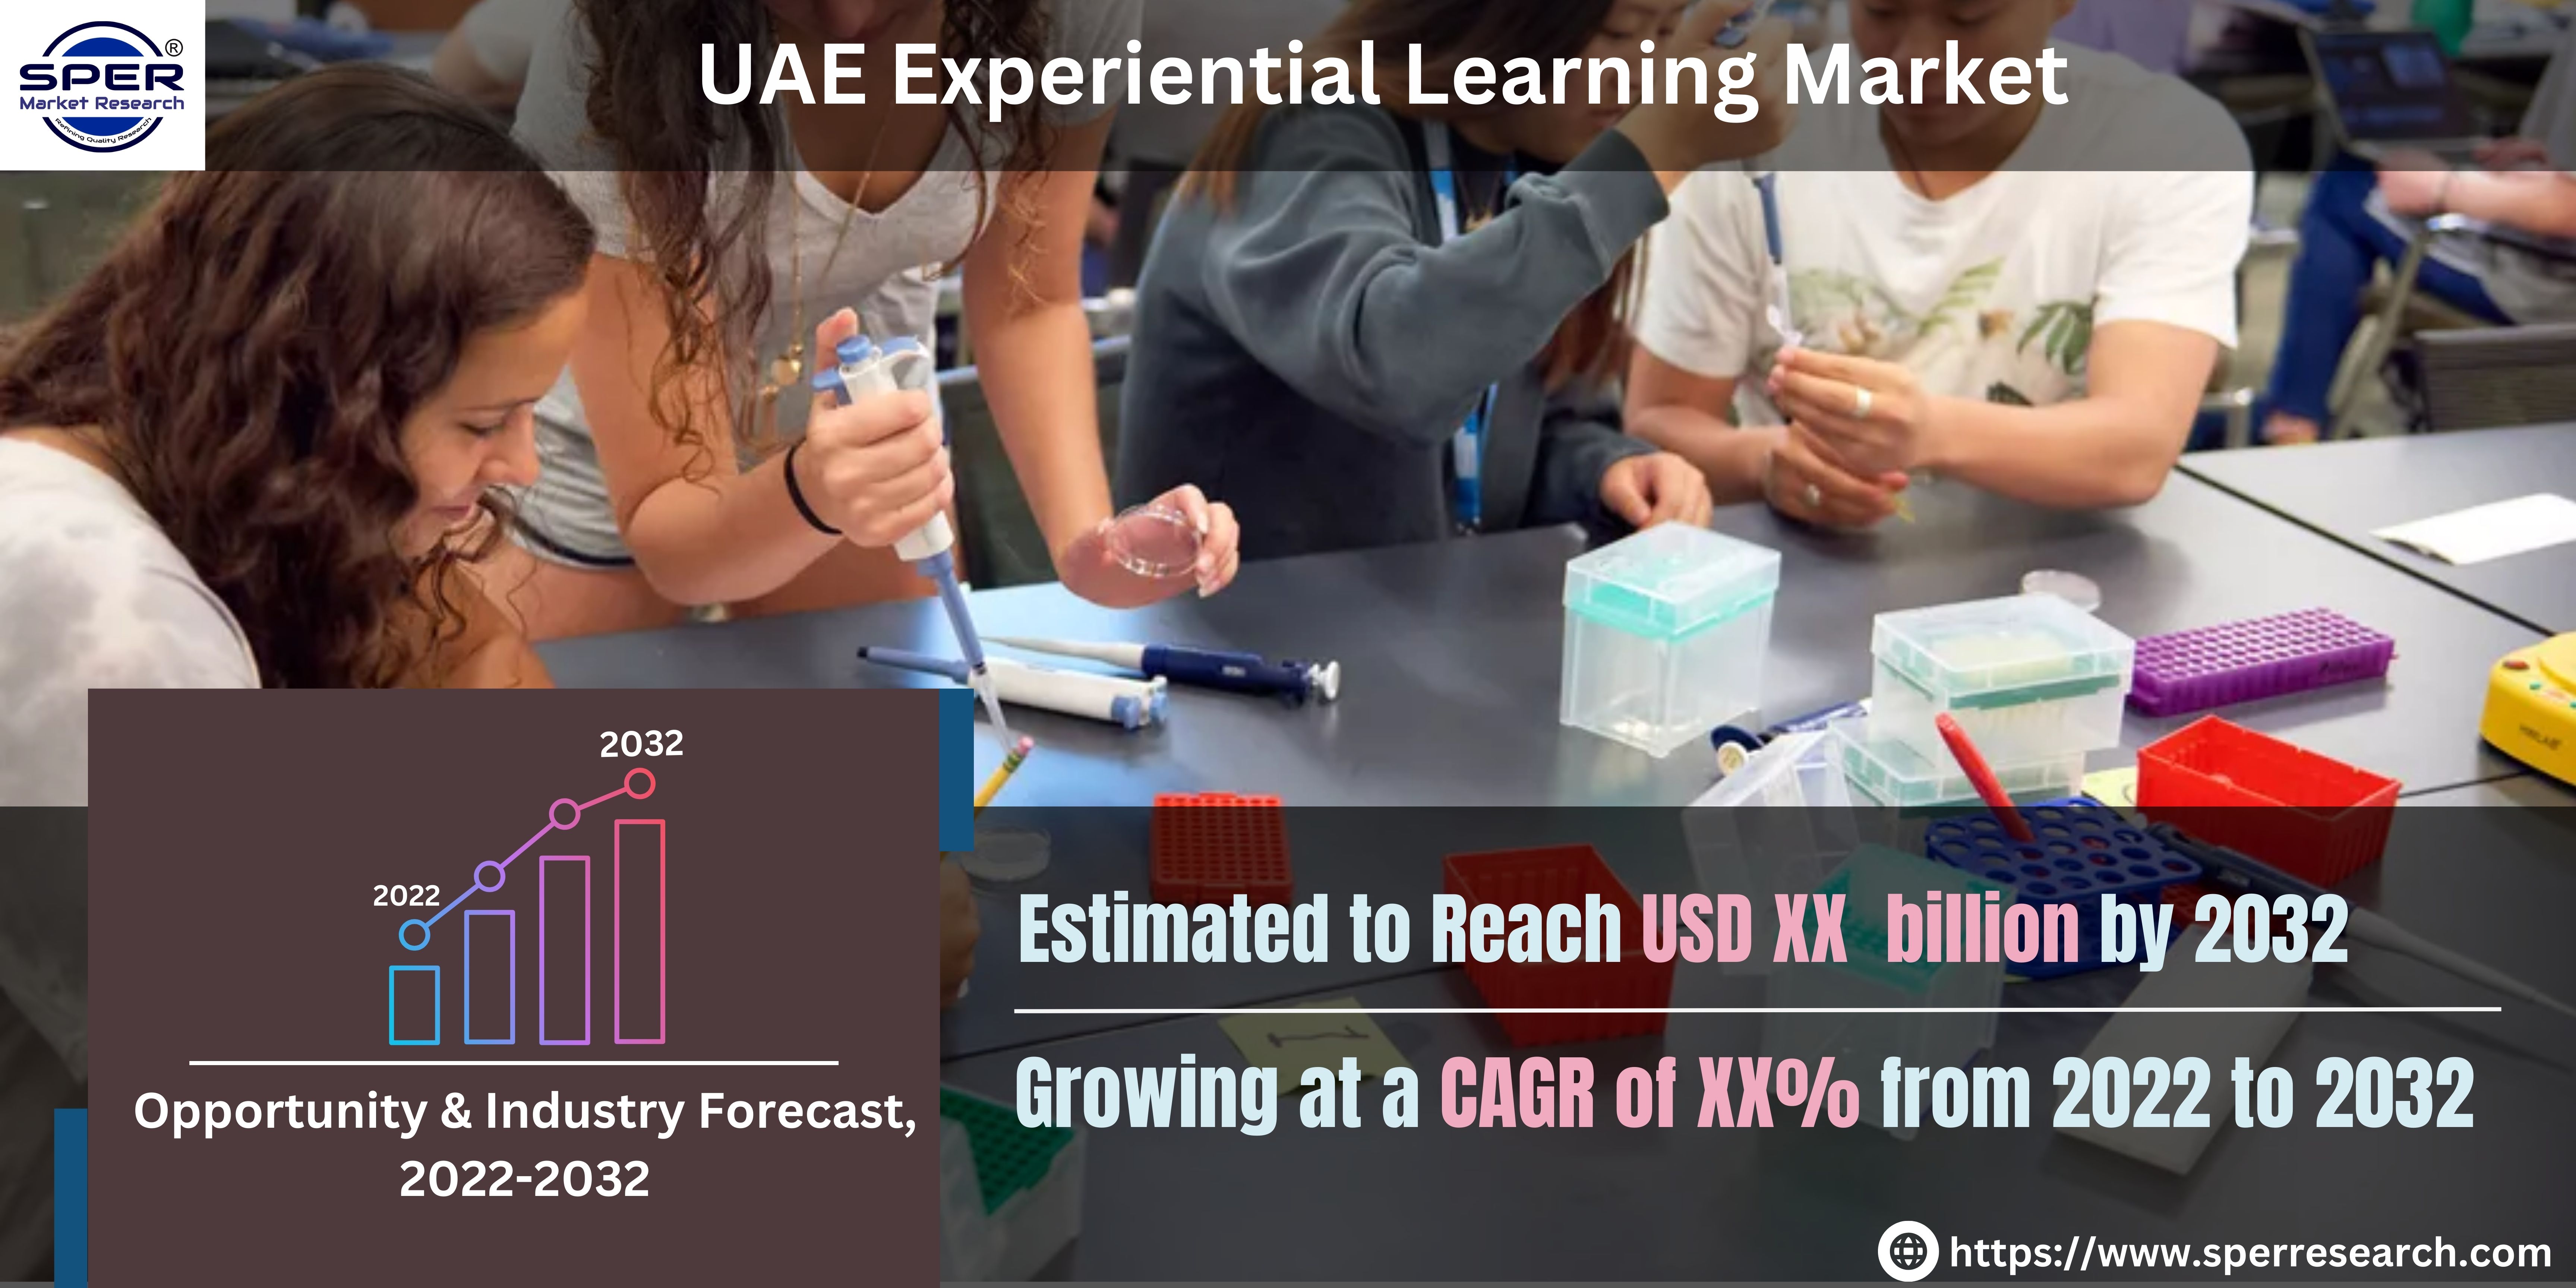 UAE Experiential Learning Market